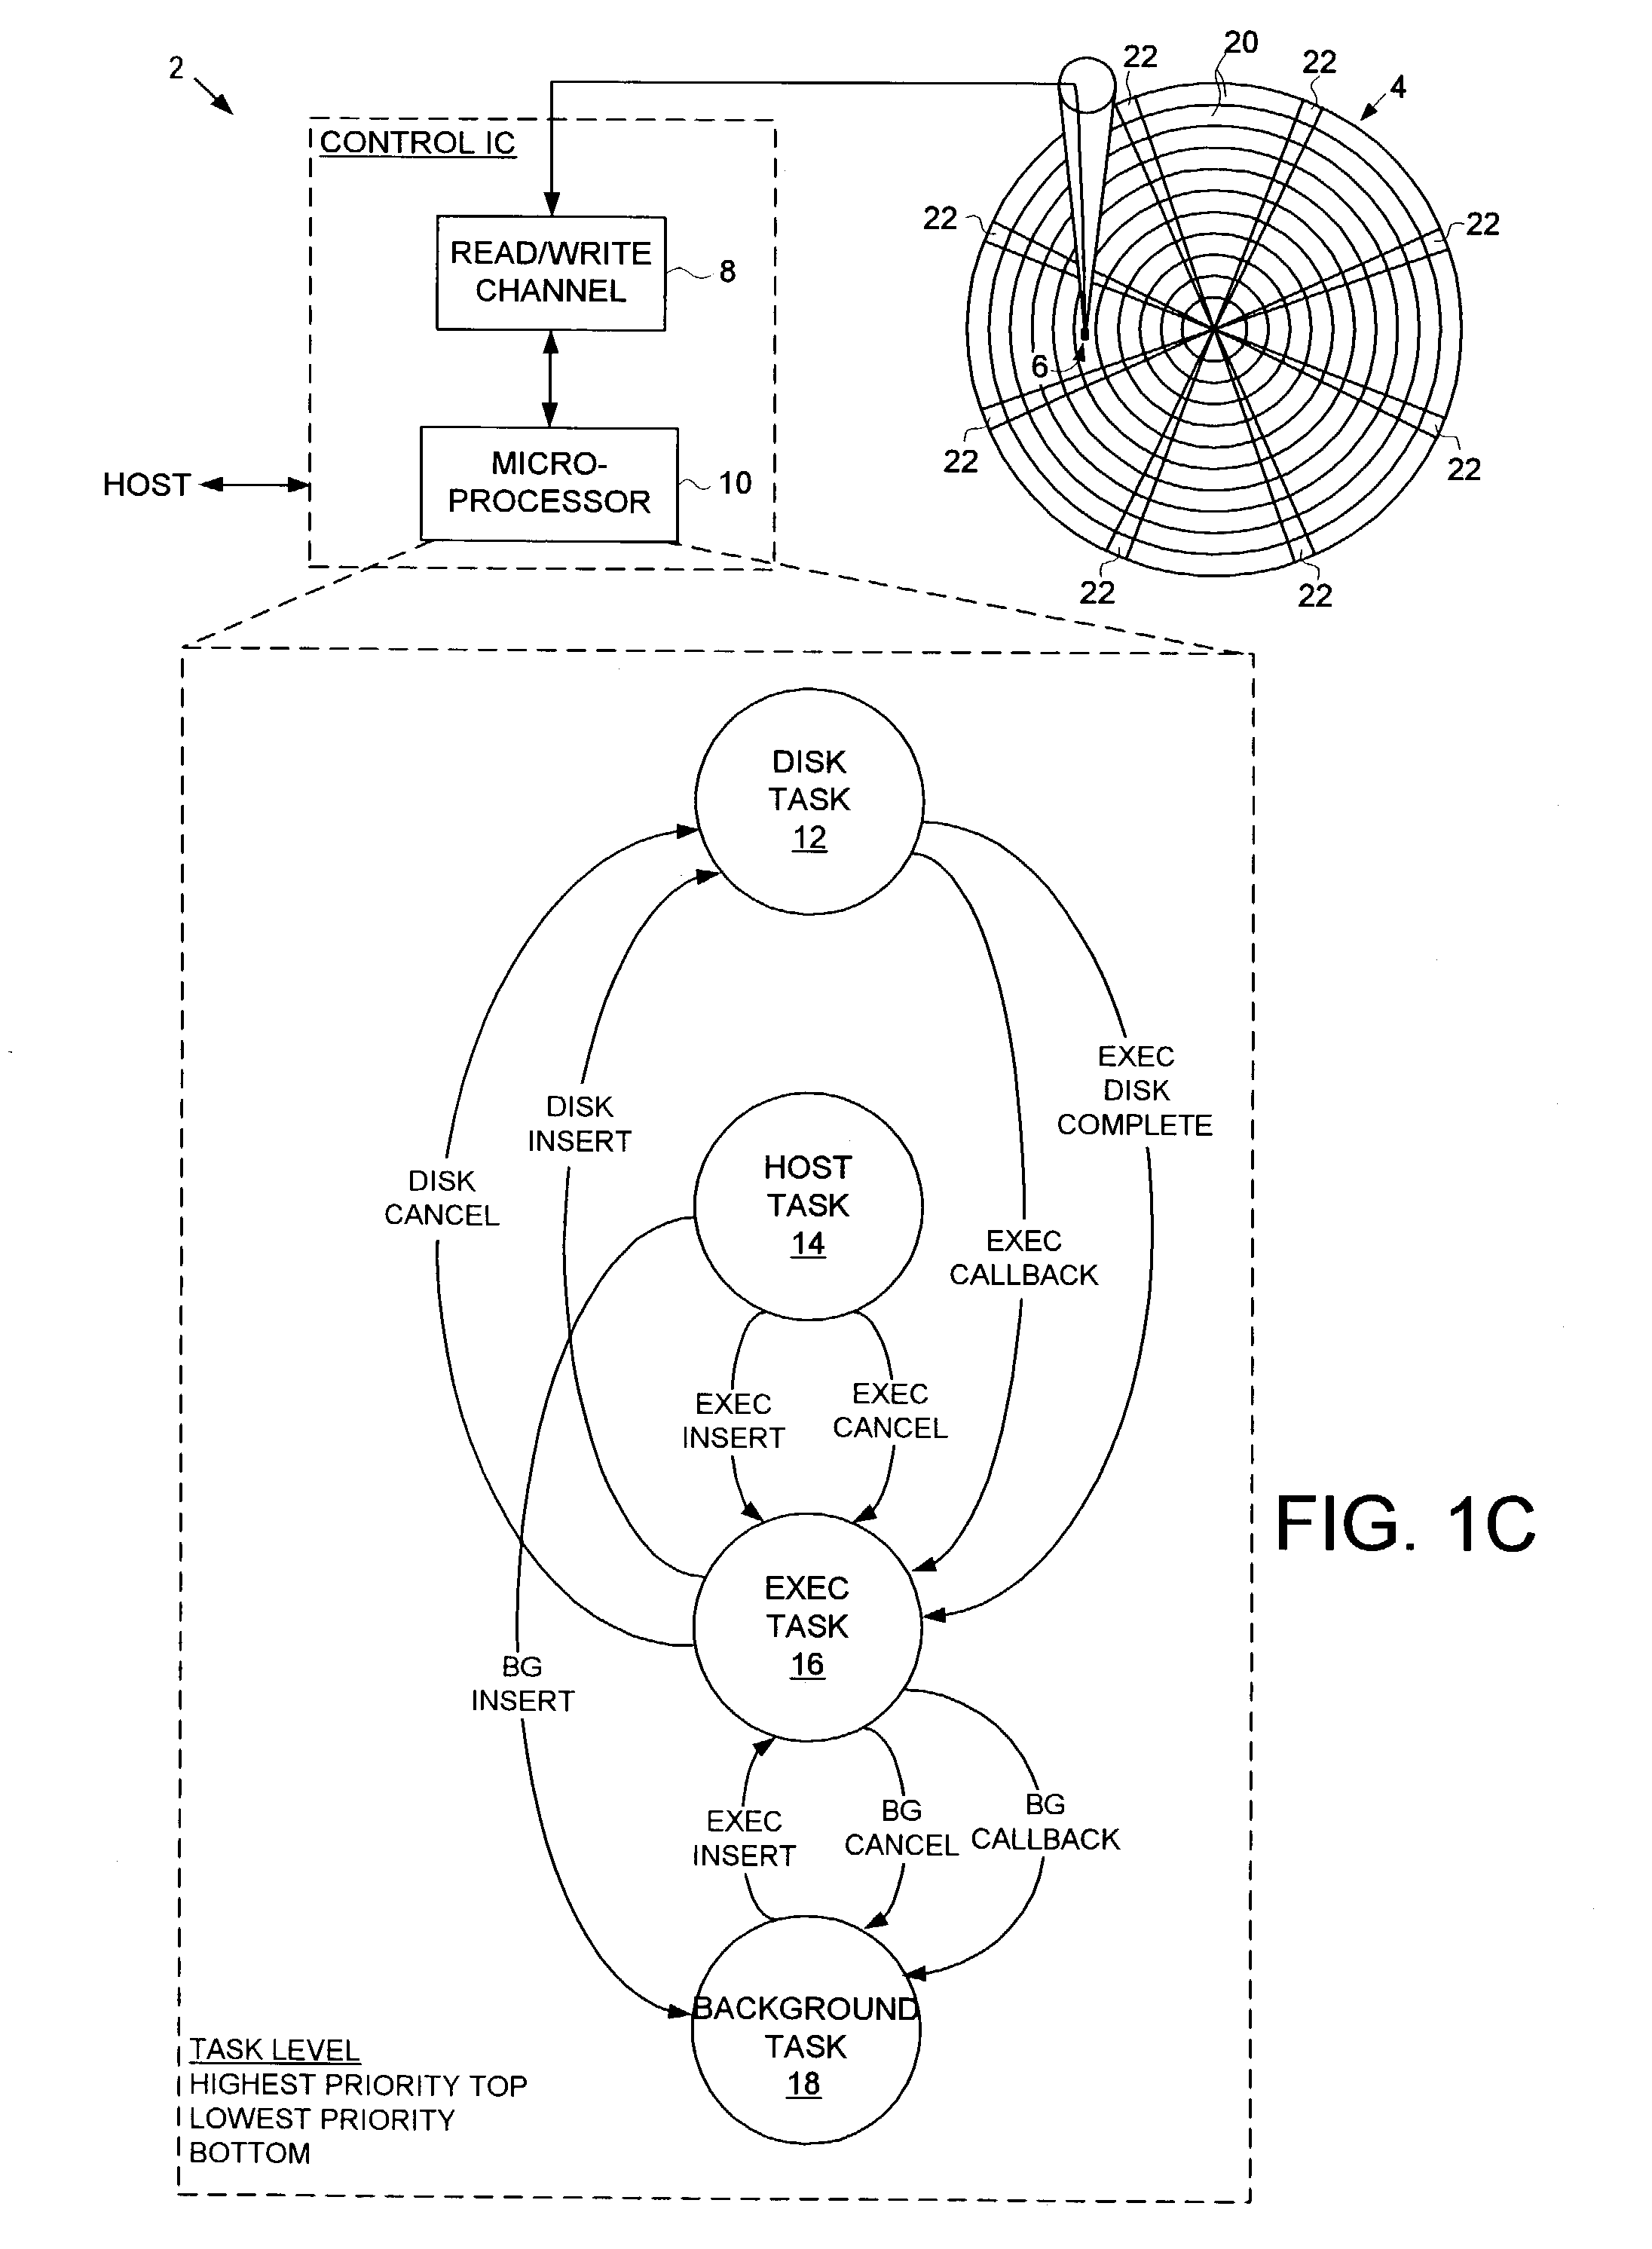 Disk drive employing a configuration data structure comprising a plurality of configuration parameters to facilitate disk commands